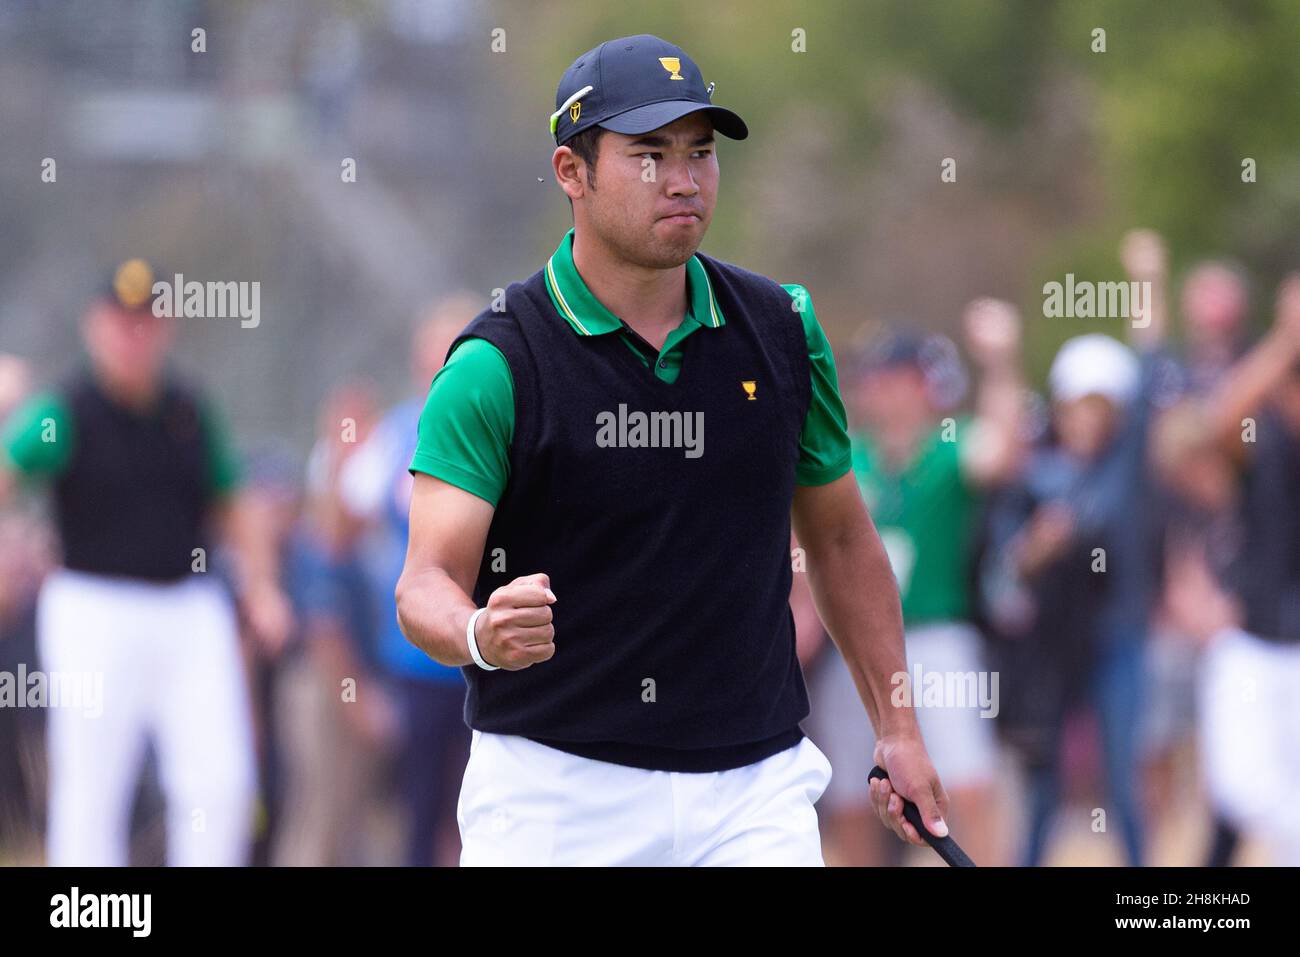 Hideki Matsuyama of Japan celebrates after putting during round 2 of The Presidents Cup Credit: Speed Media/Alamy Live News Stock Photo